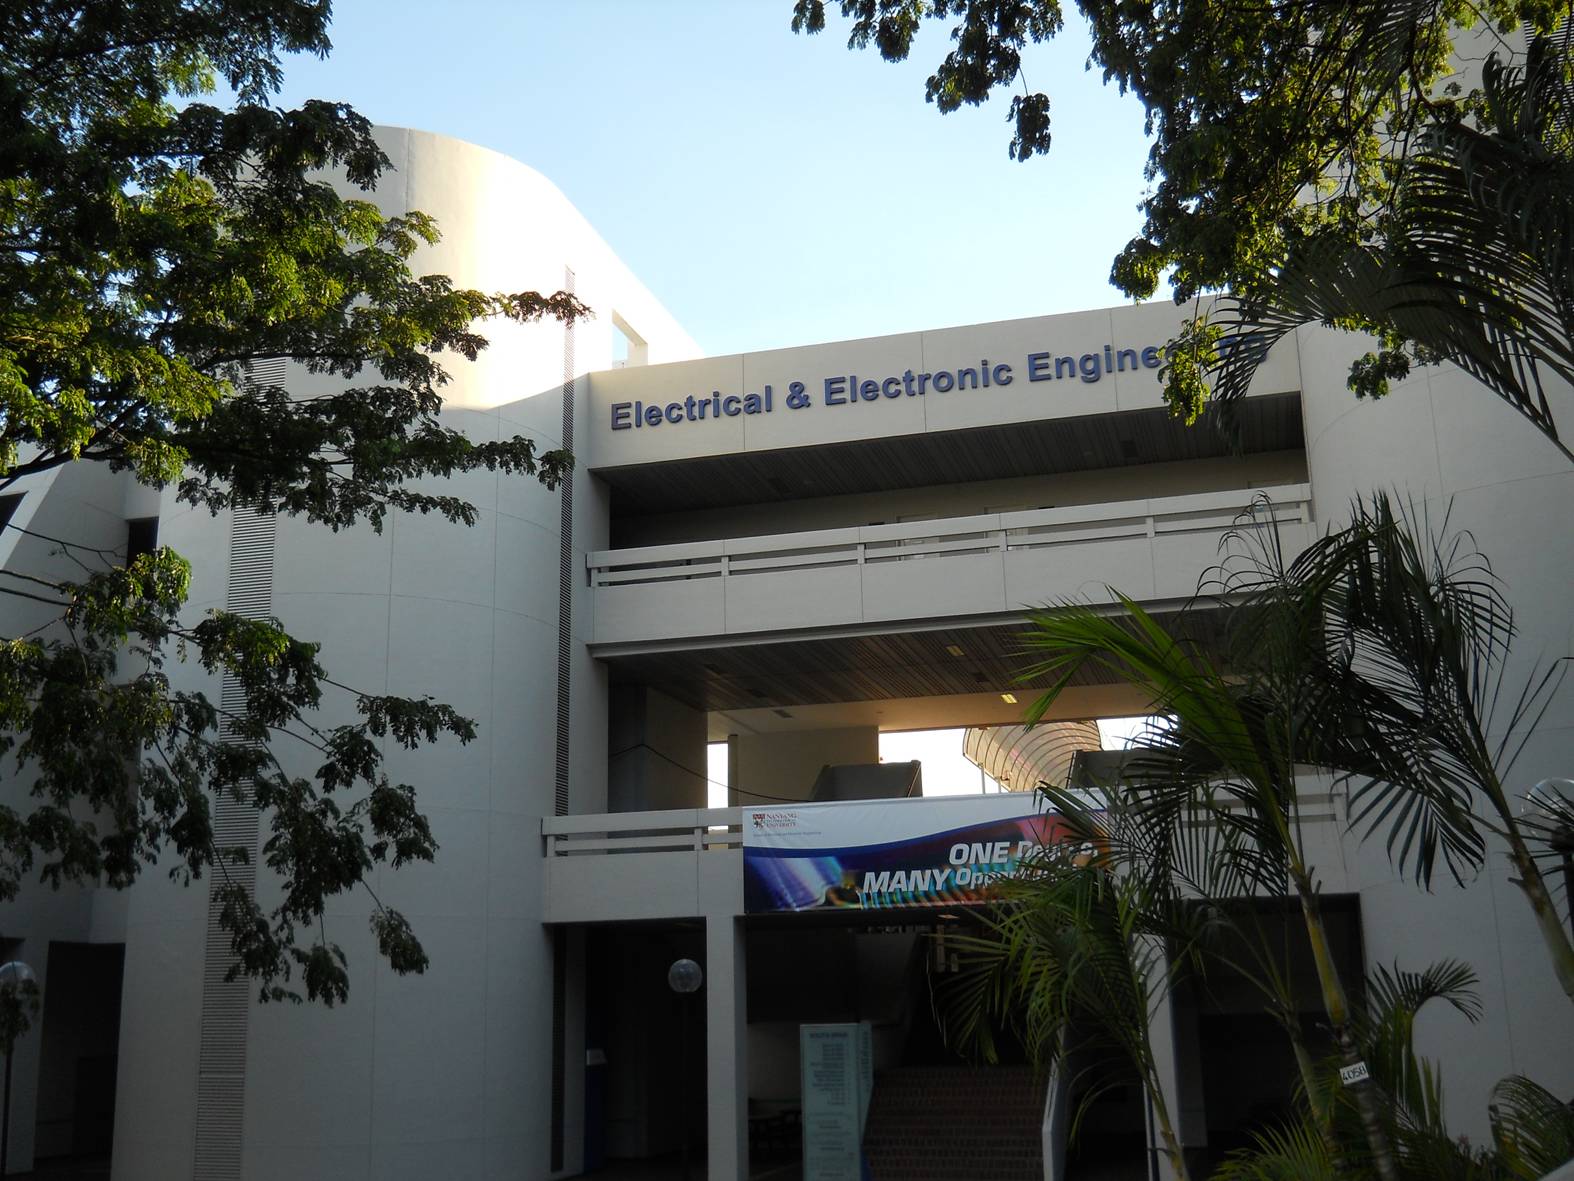 picture: Electrical and Electronic Engineering building, Nanyang Technological University, Singapore